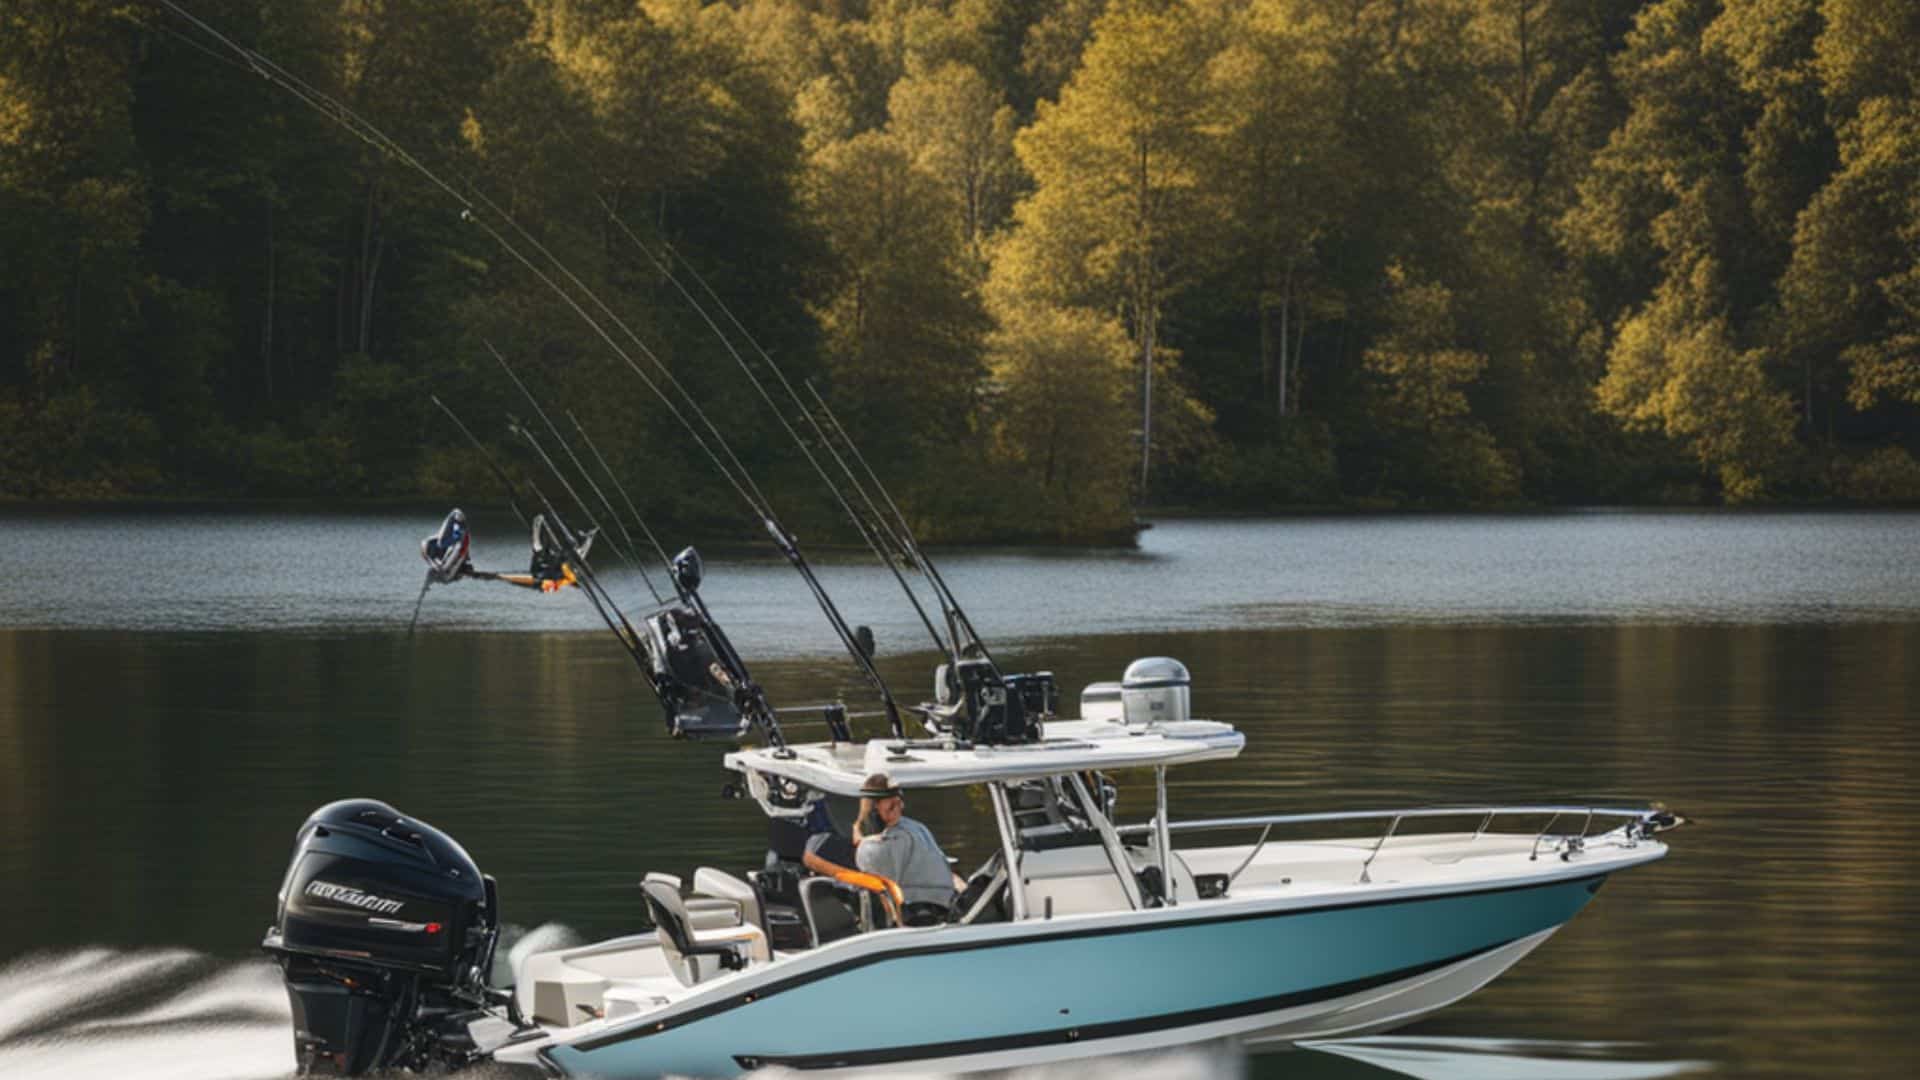 Trolling motor being used on a boat